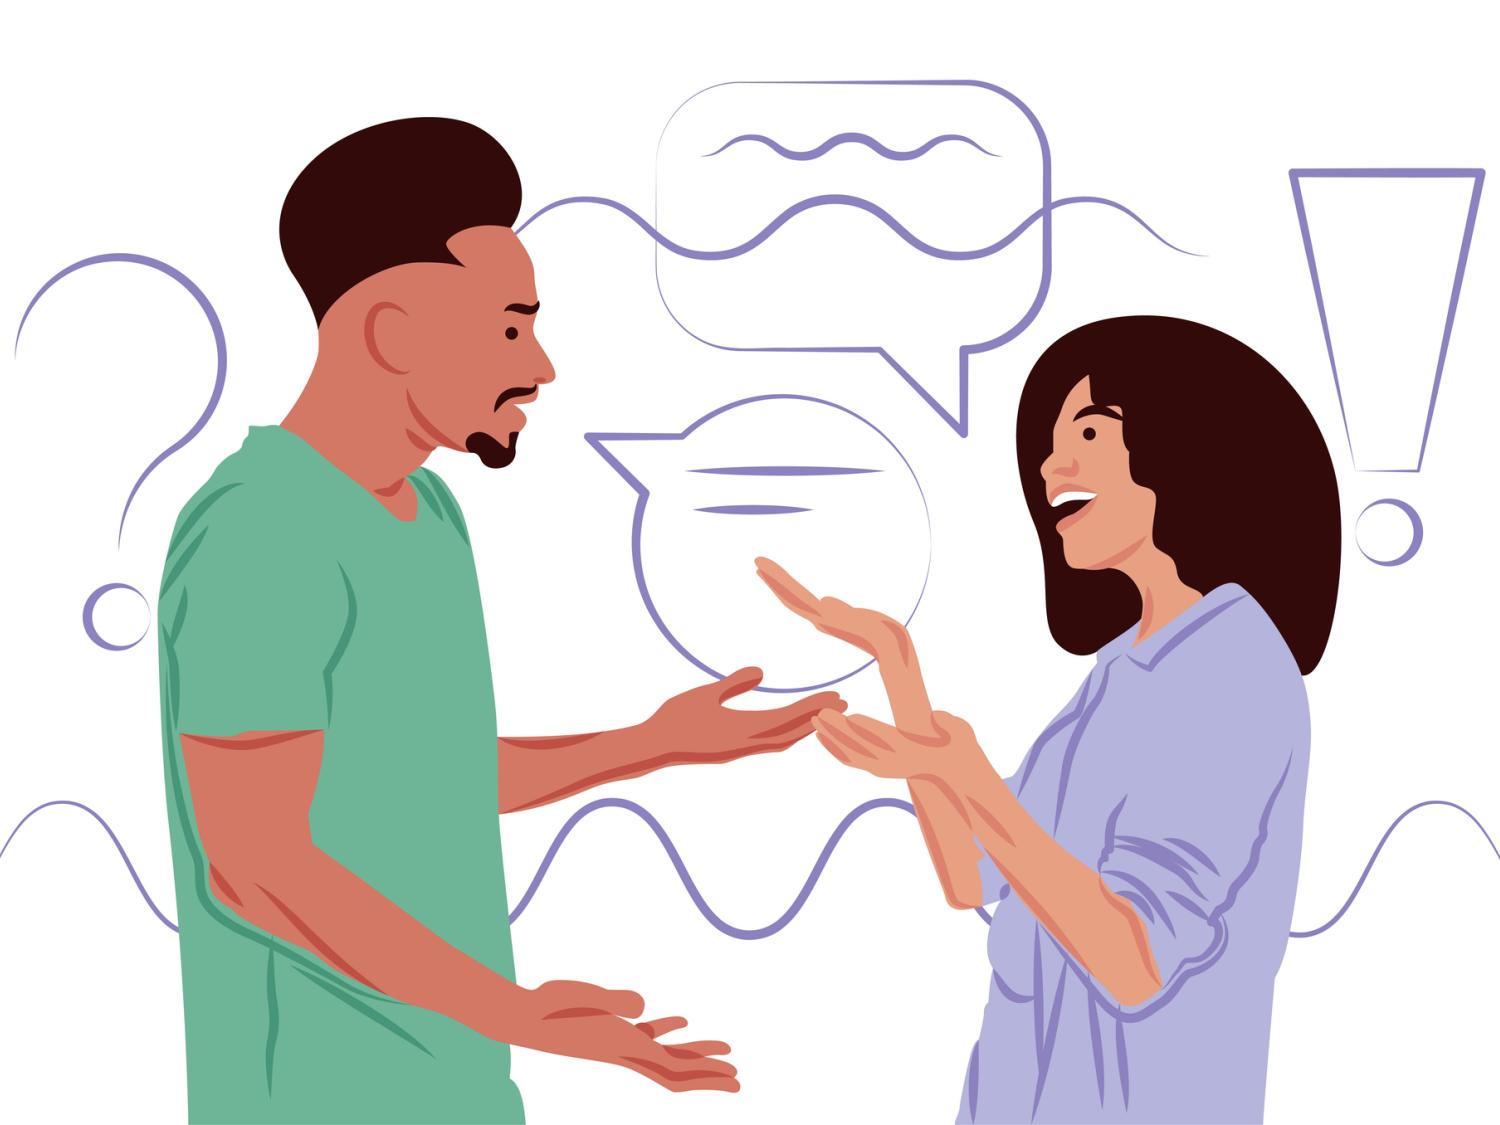 Illustration of African American man and Latino woman having a conversation